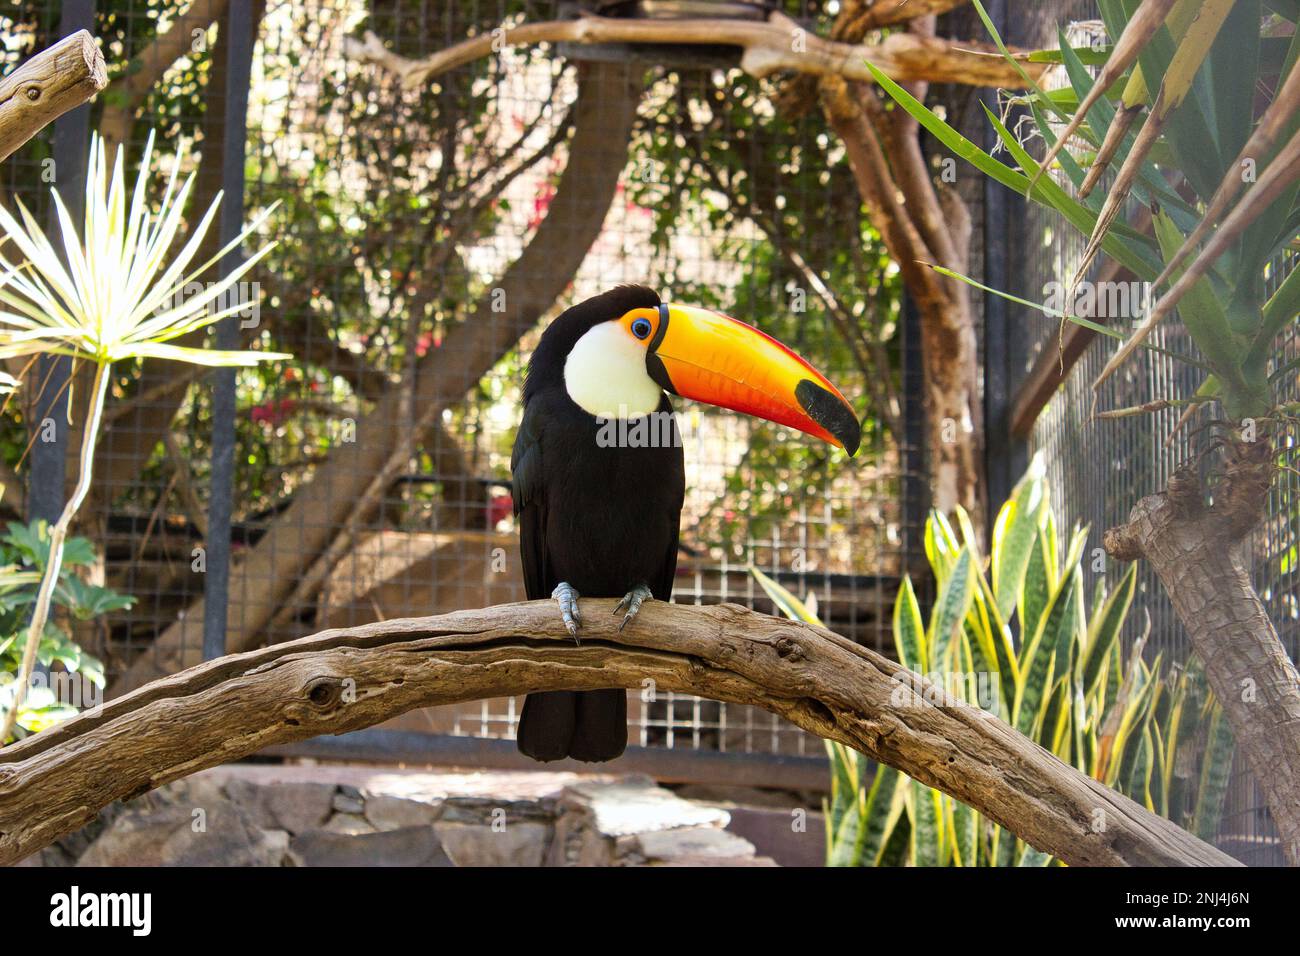 Full body shot of a toucan sitting on a branch, branches and plants in the background. Stock Photo